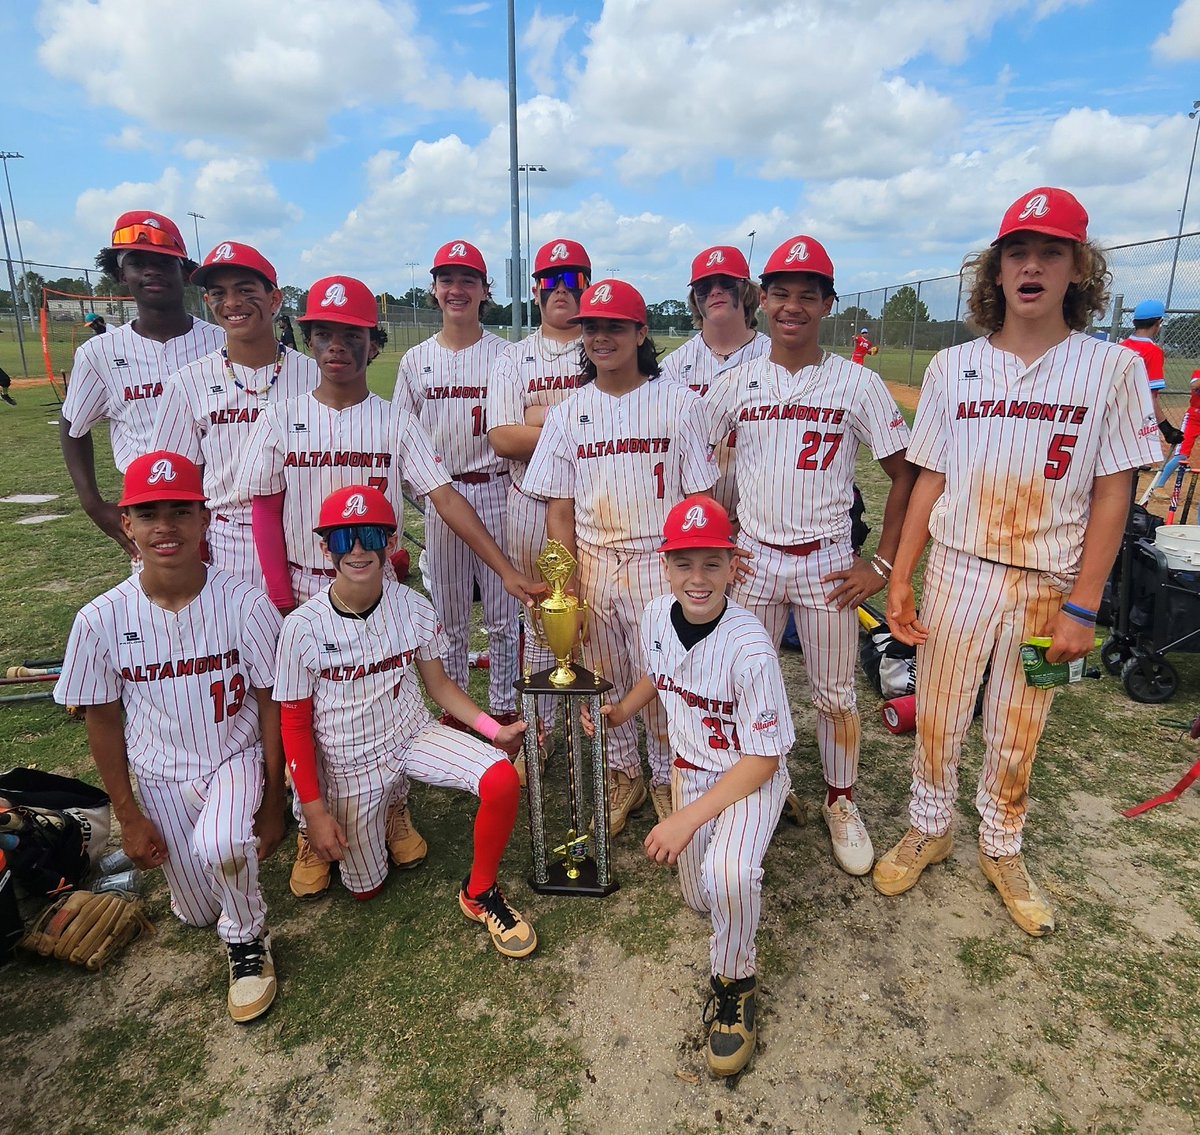 Huge props to the #ABA 13U travel team for bringing home the gold at the GOB Florida State Championship tournament! 4-0 and outscoring their opponents 60-5? That's how it's done! Congrats, fellas! 🙌 #WhereYouTrainMatters #TravelBaseball